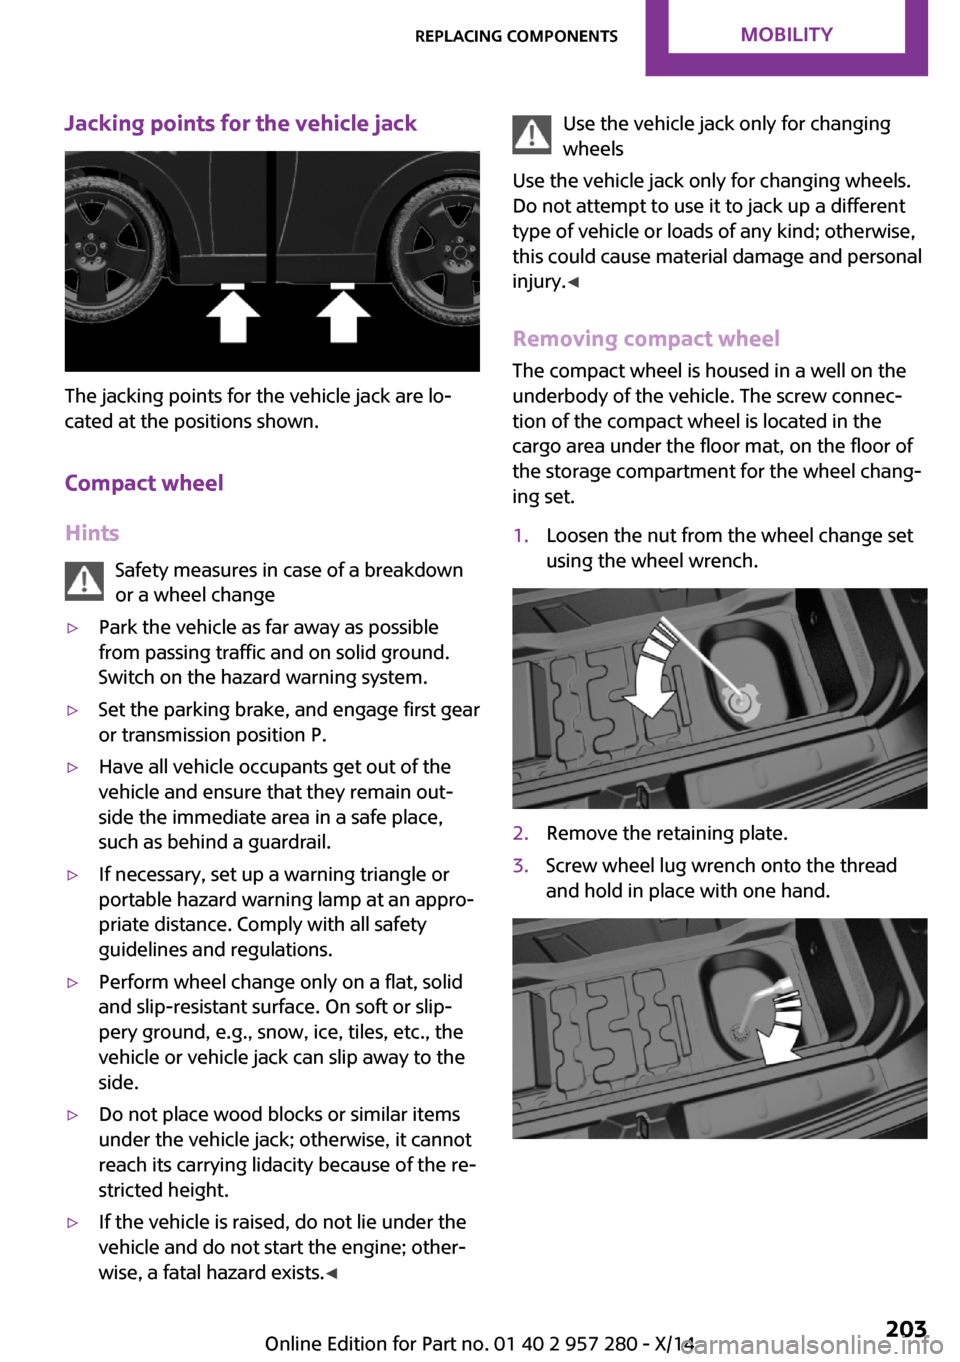 MINI 3 door 2014  Owners Manual Jacking points for the vehicle jack
The jacking points for the vehicle jack are lo‐
cated at the positions shown.
Compact wheel
Hints Safety measures in case of a breakdown
or a wheel change
▷Park